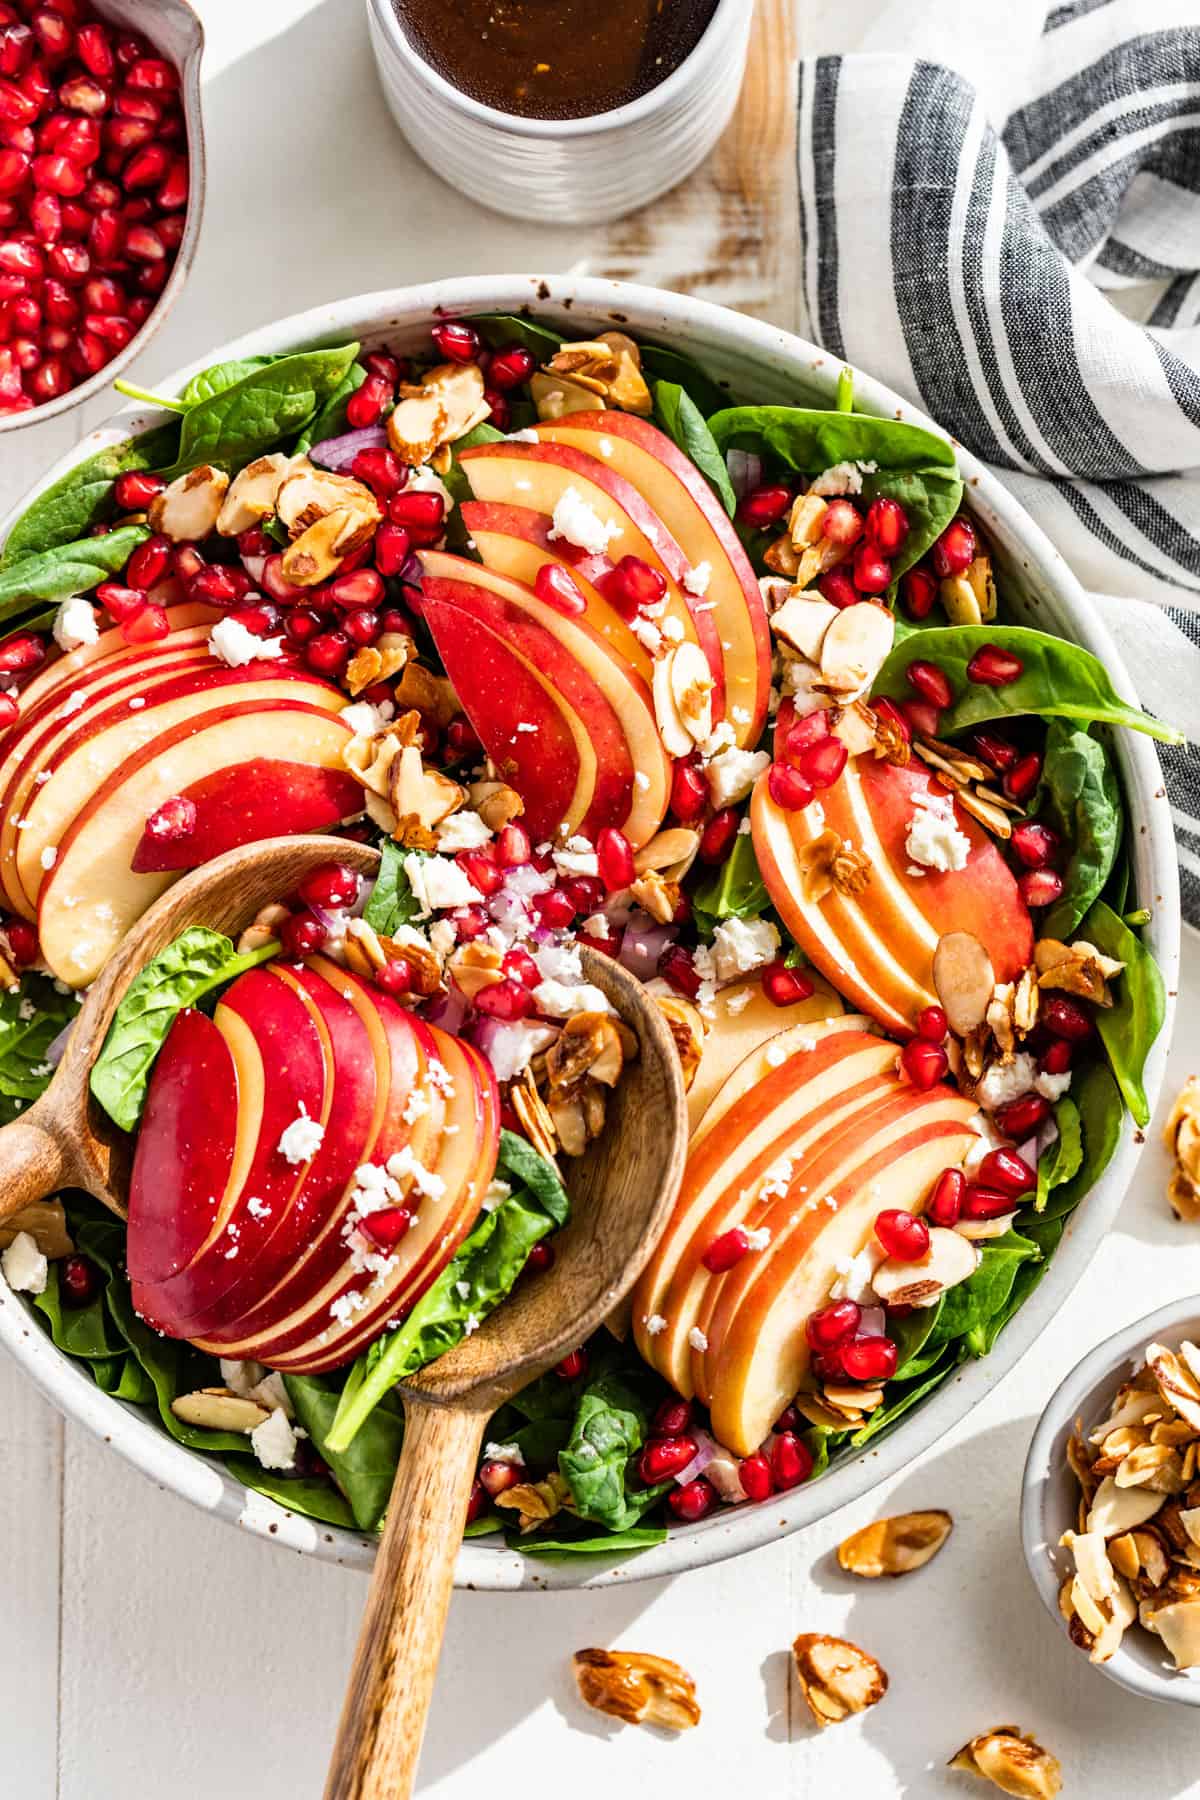 Straight down view of Apple Spinach Salad in a pottery bowl with wooden serving spoons and balsamic vinaigrette & pomegranate arils on the side.